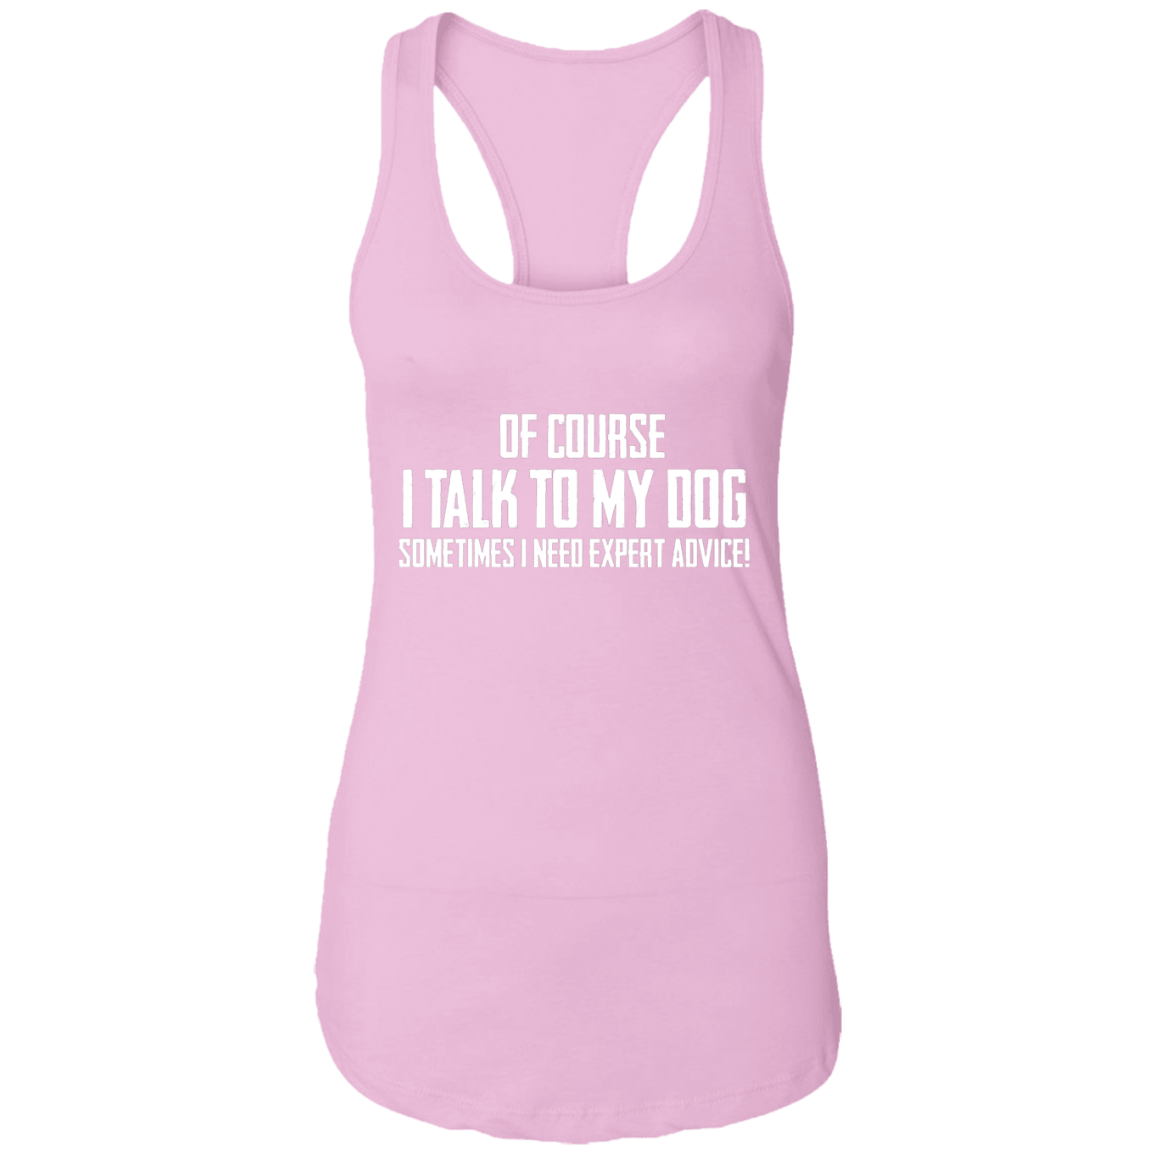 Of Course I Talk To My Dog - Ladies Racer Back Tank.